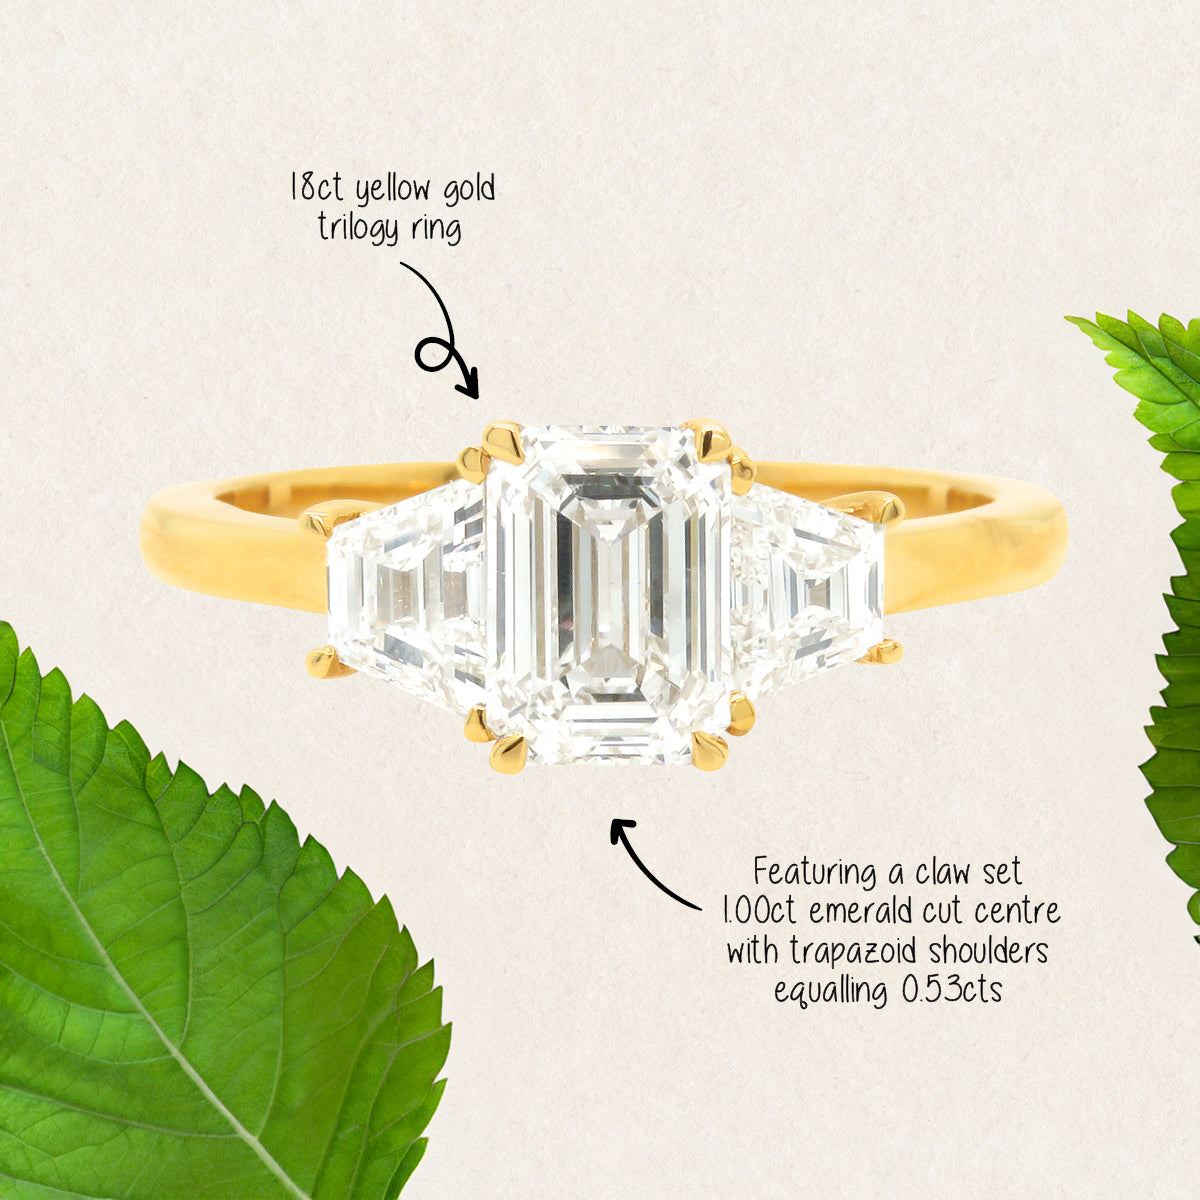 Featuring 1.53ct emerald cut lab grown diamond trilogy ring by greenhouse diamonds